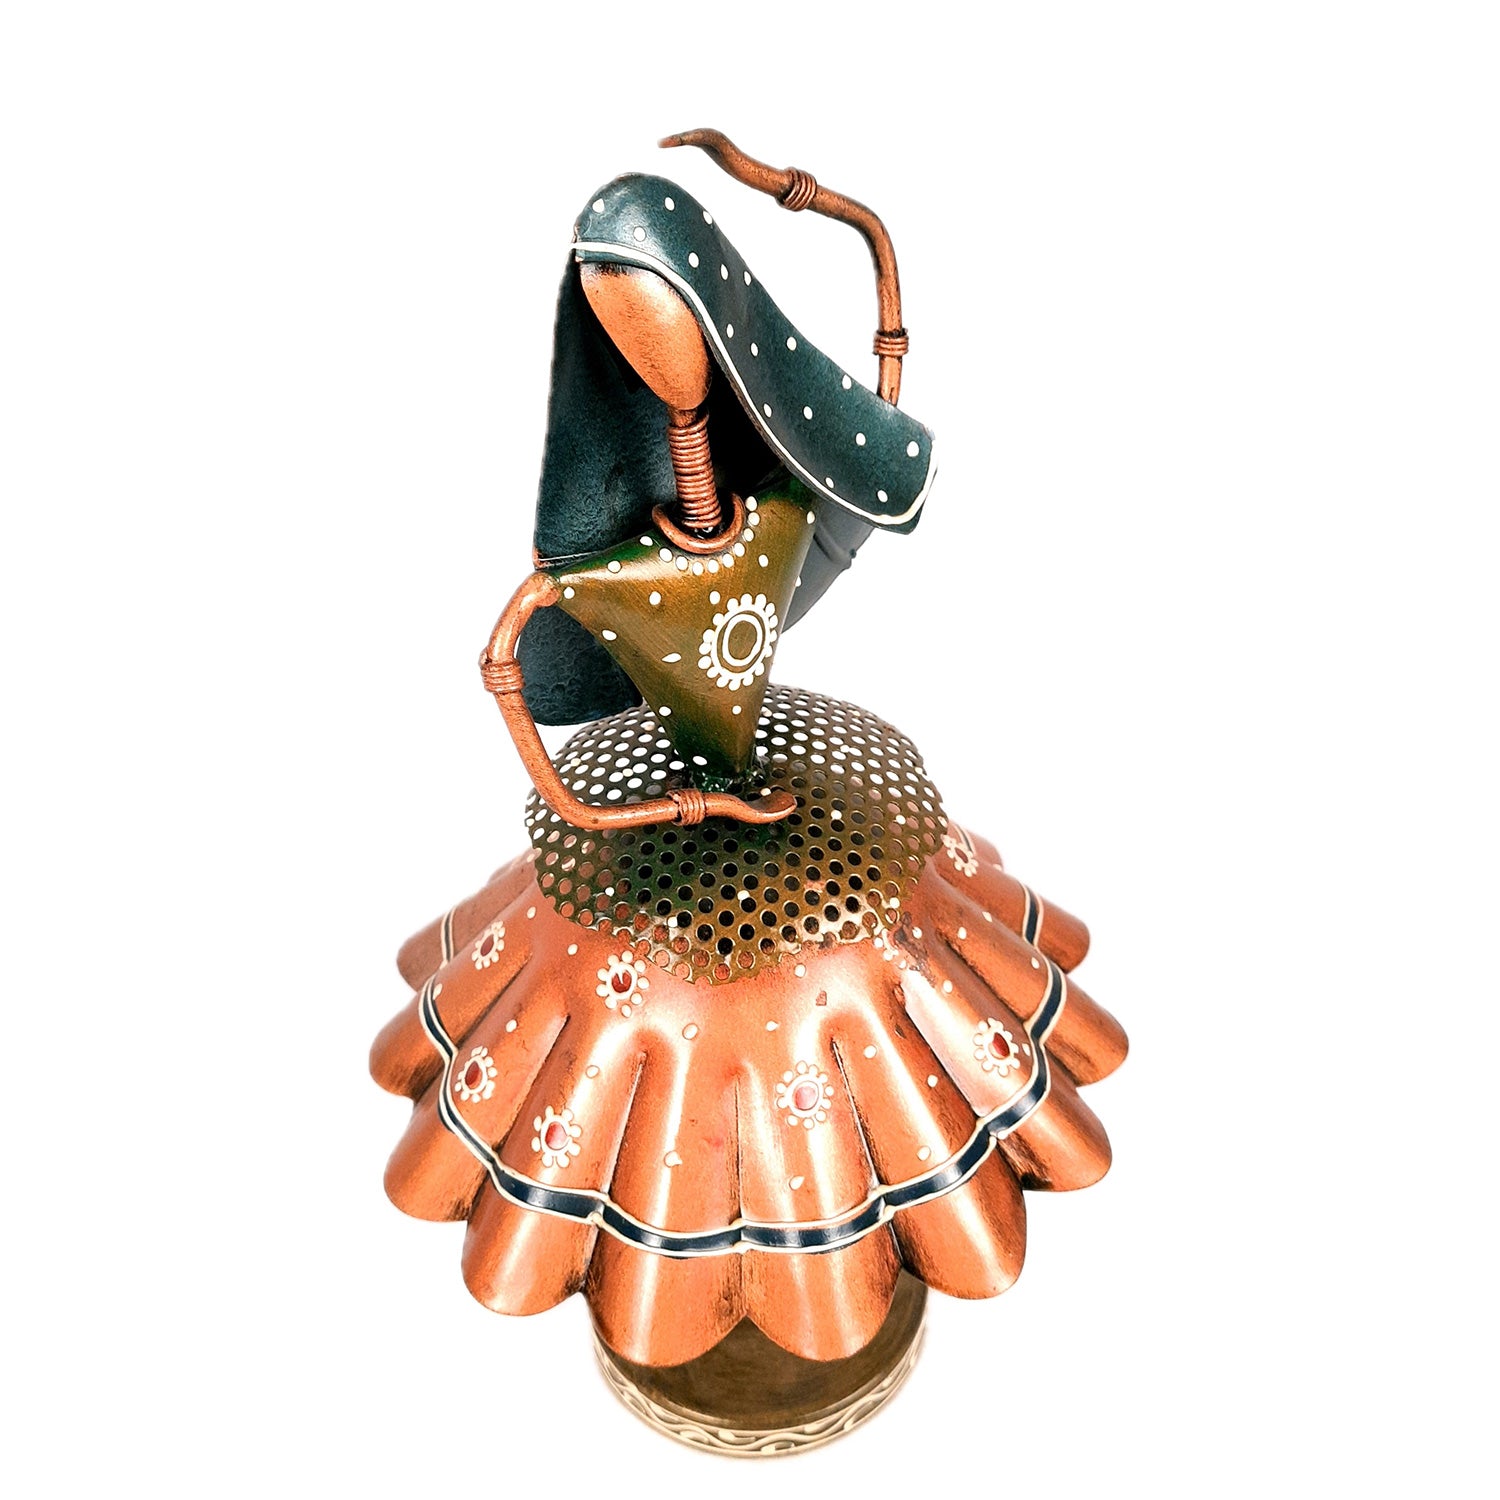 Showpiece Dancing Girl - For Home Decor | Handicraft Figurines - For Table, Living Room, Bedroom & TV Unit| Show Piece For Gifts - 14 Inch - Apkamart